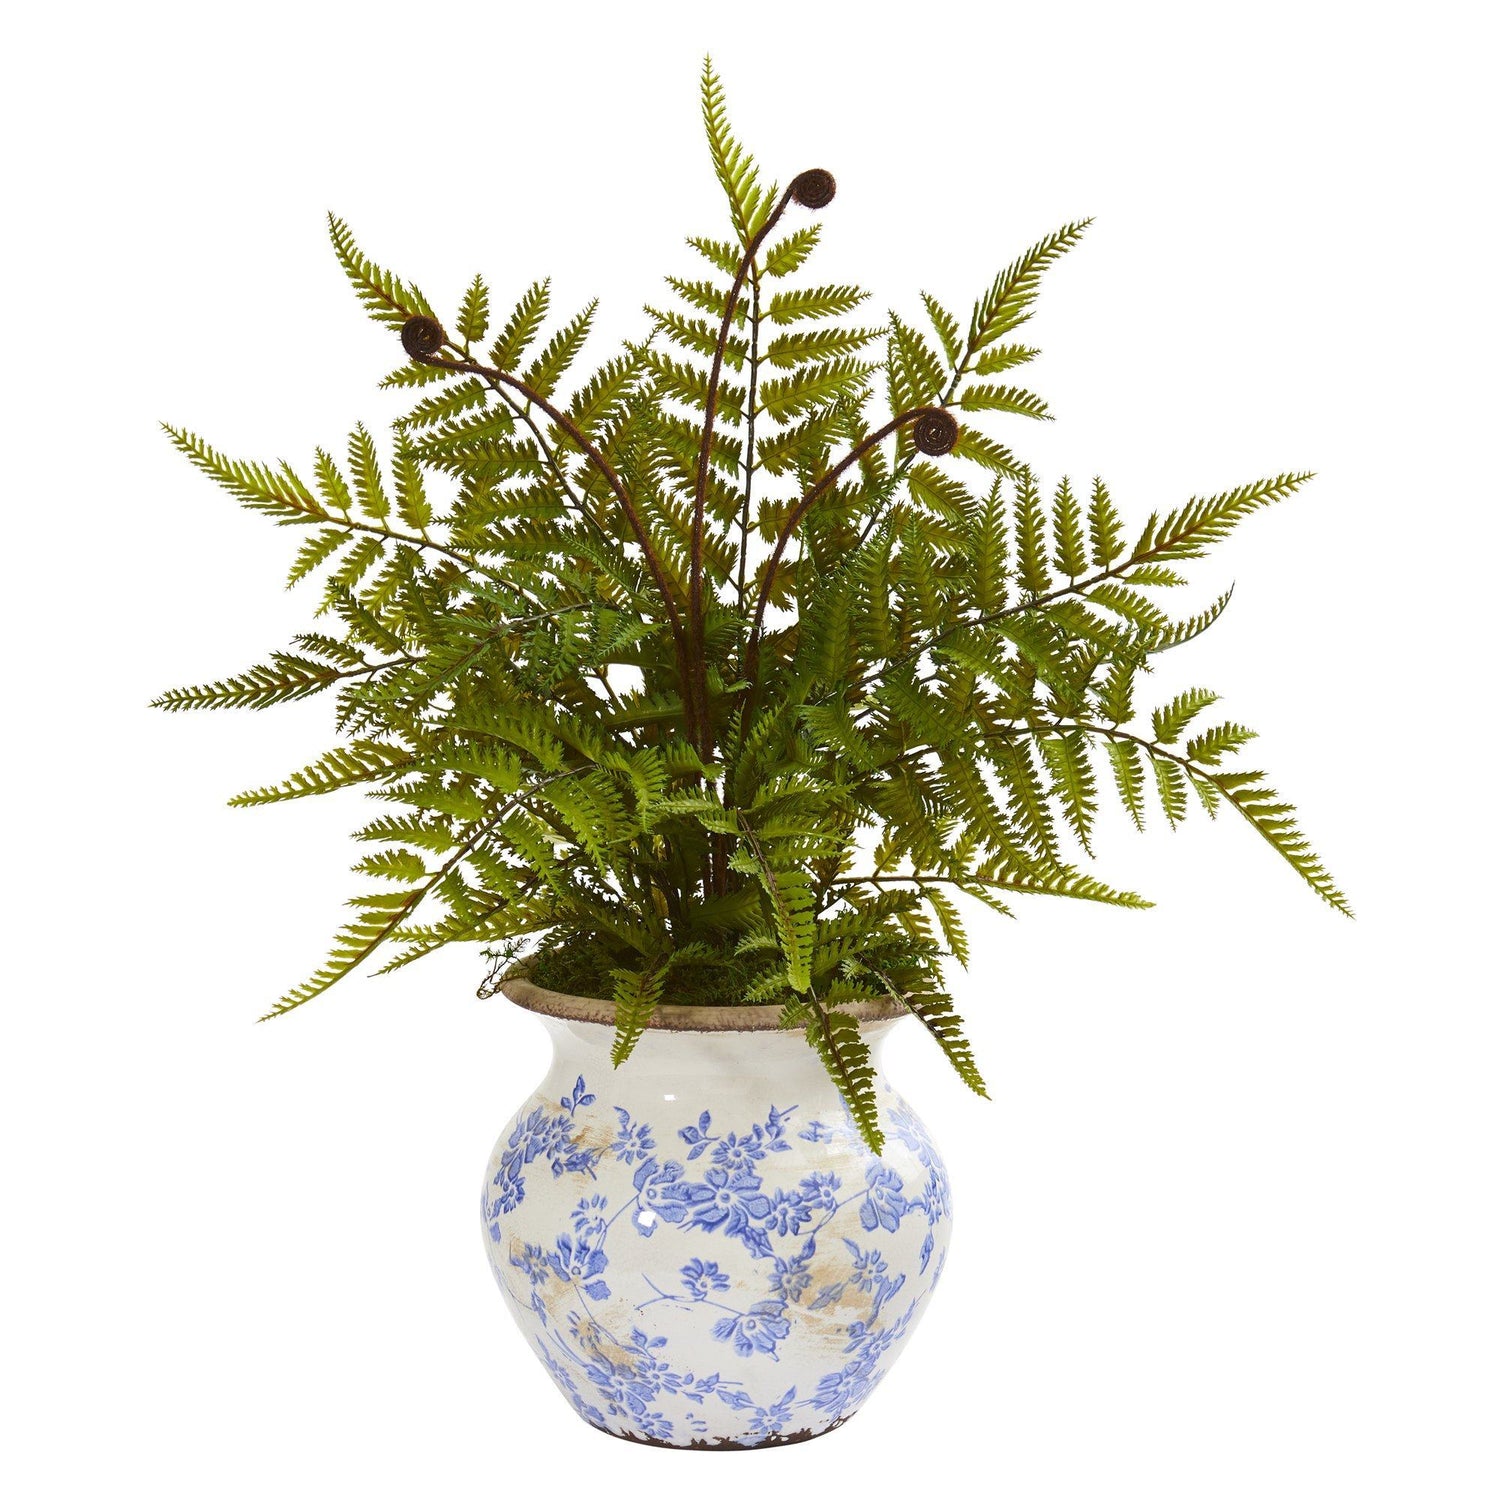 17” Fern Artificial Plant in Floral Planter